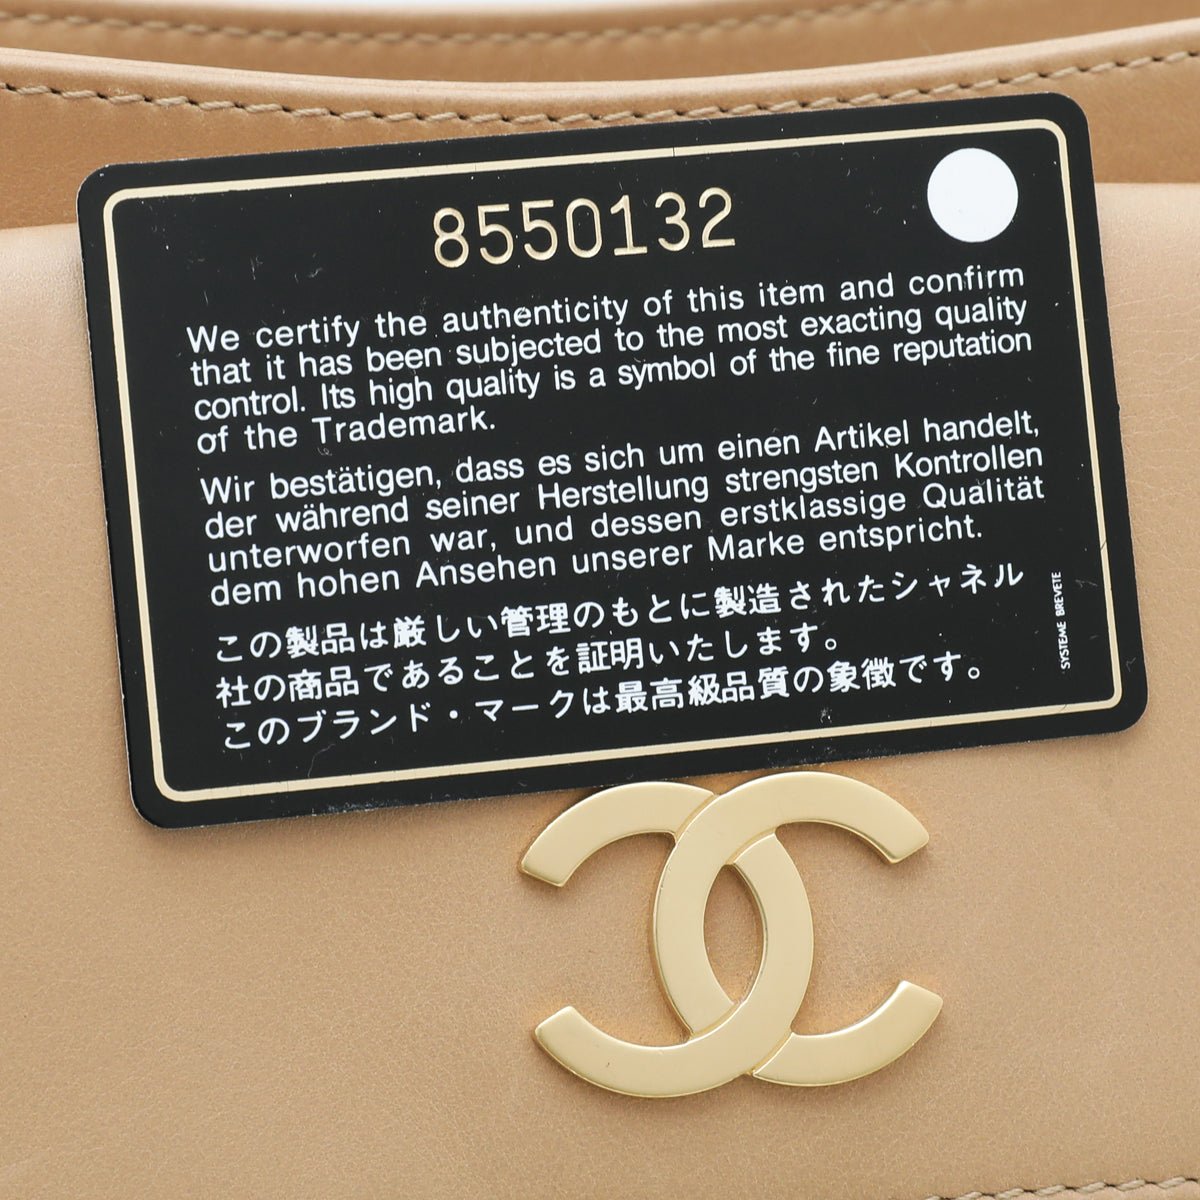 Chanel - Chanel Beige Front Flap Pocket Tote Bag | The Closet